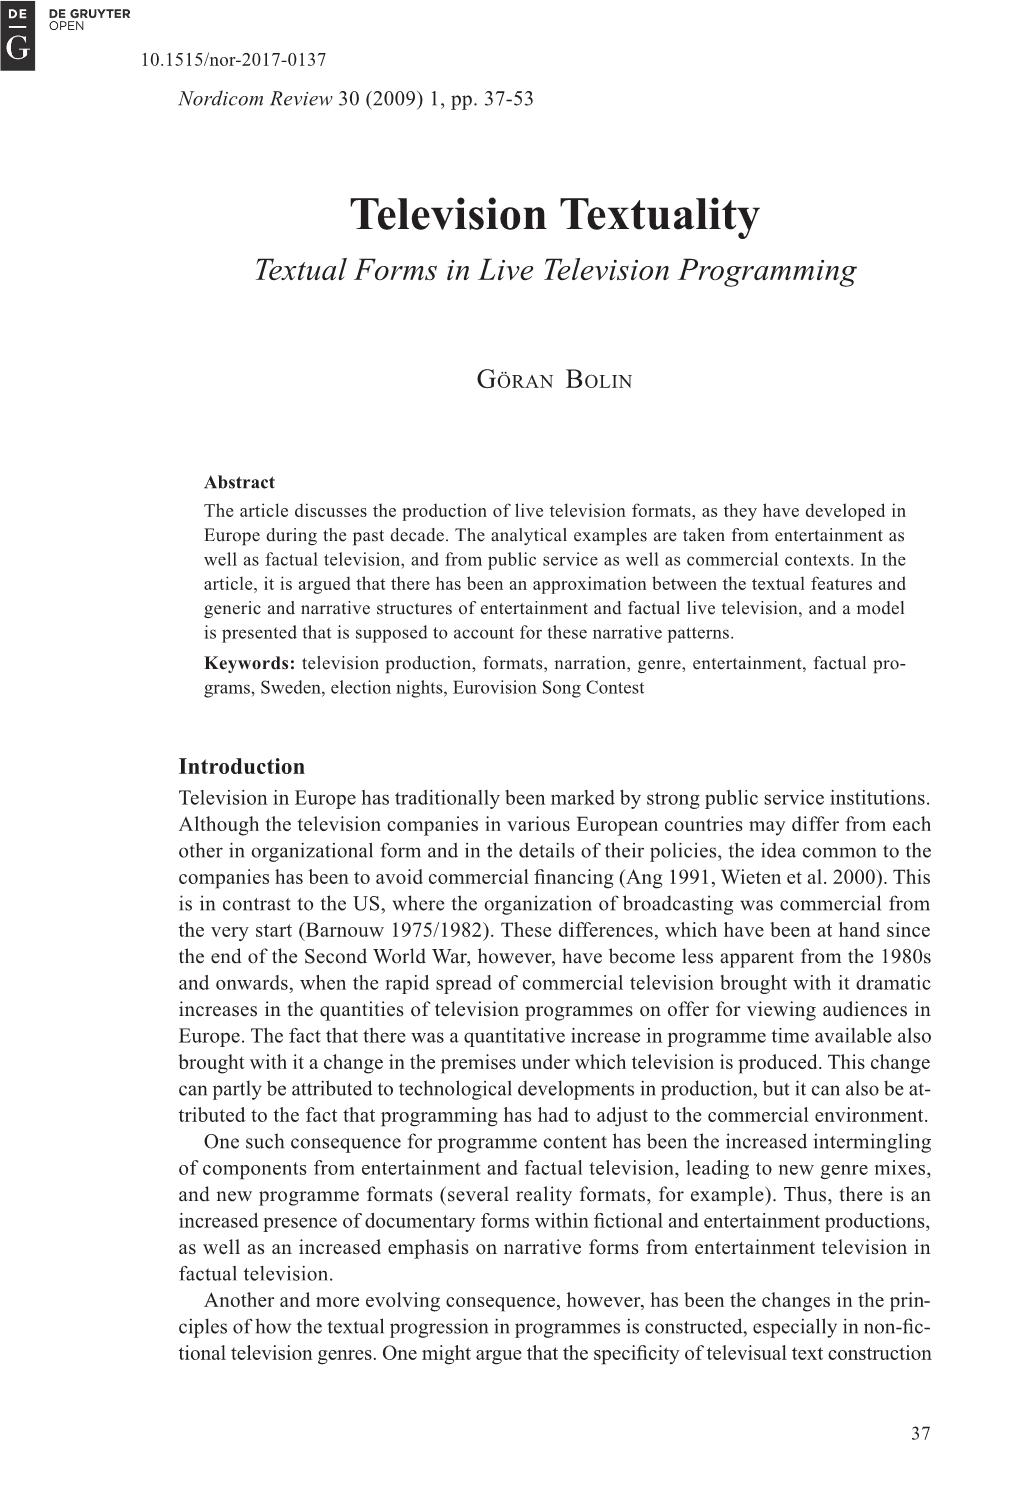 Television Textuality Textual Forms in Live Television Programming